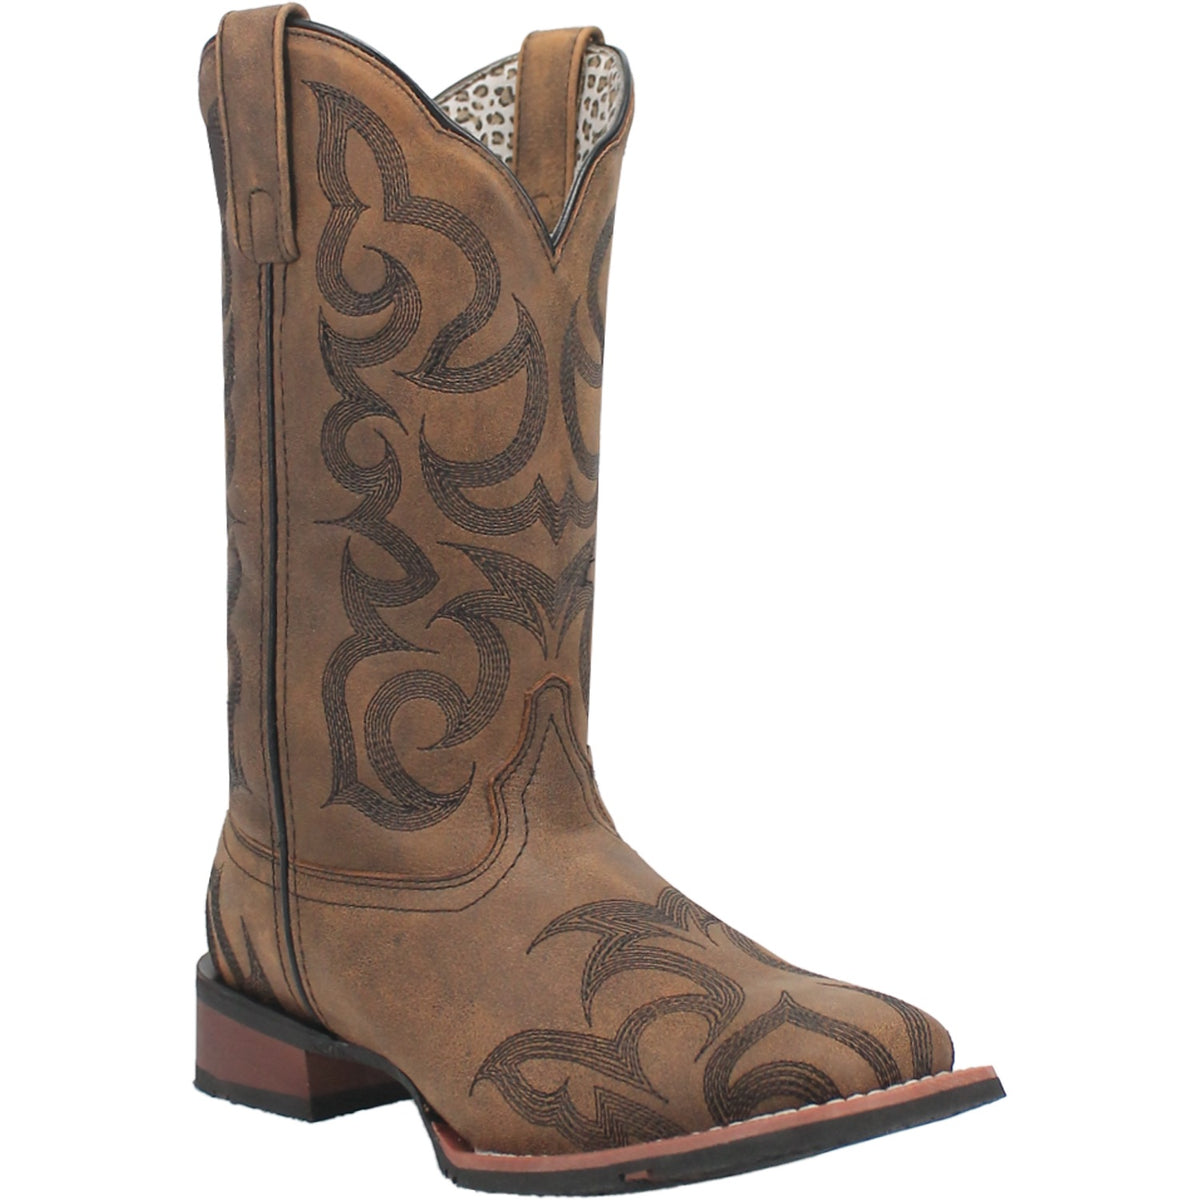 SARIAH LEATHER BOOT Cover